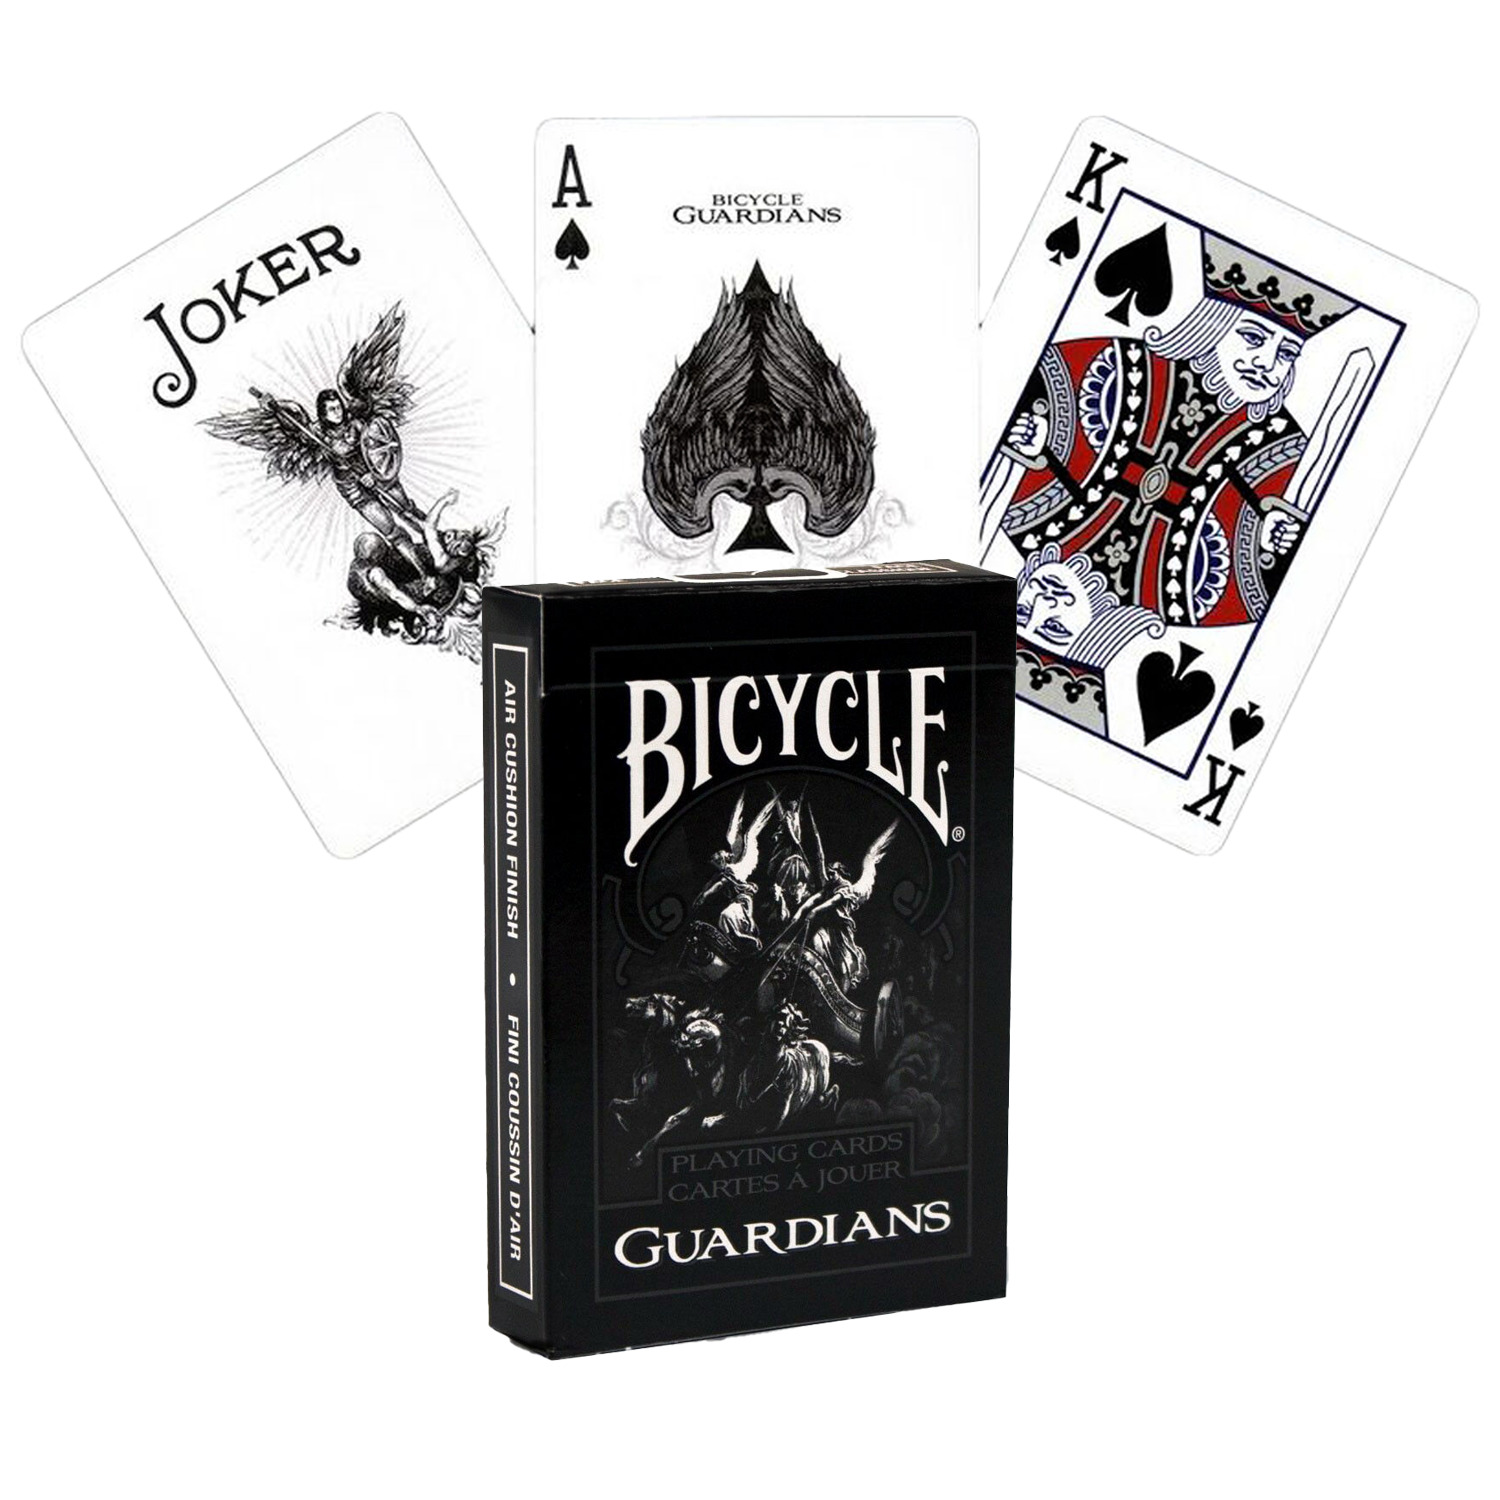 BICYCLE GUARDIANS PLAYING CARDS DECK BY THEORY 11 MAGIC TRICKS USPCC SEALED USA